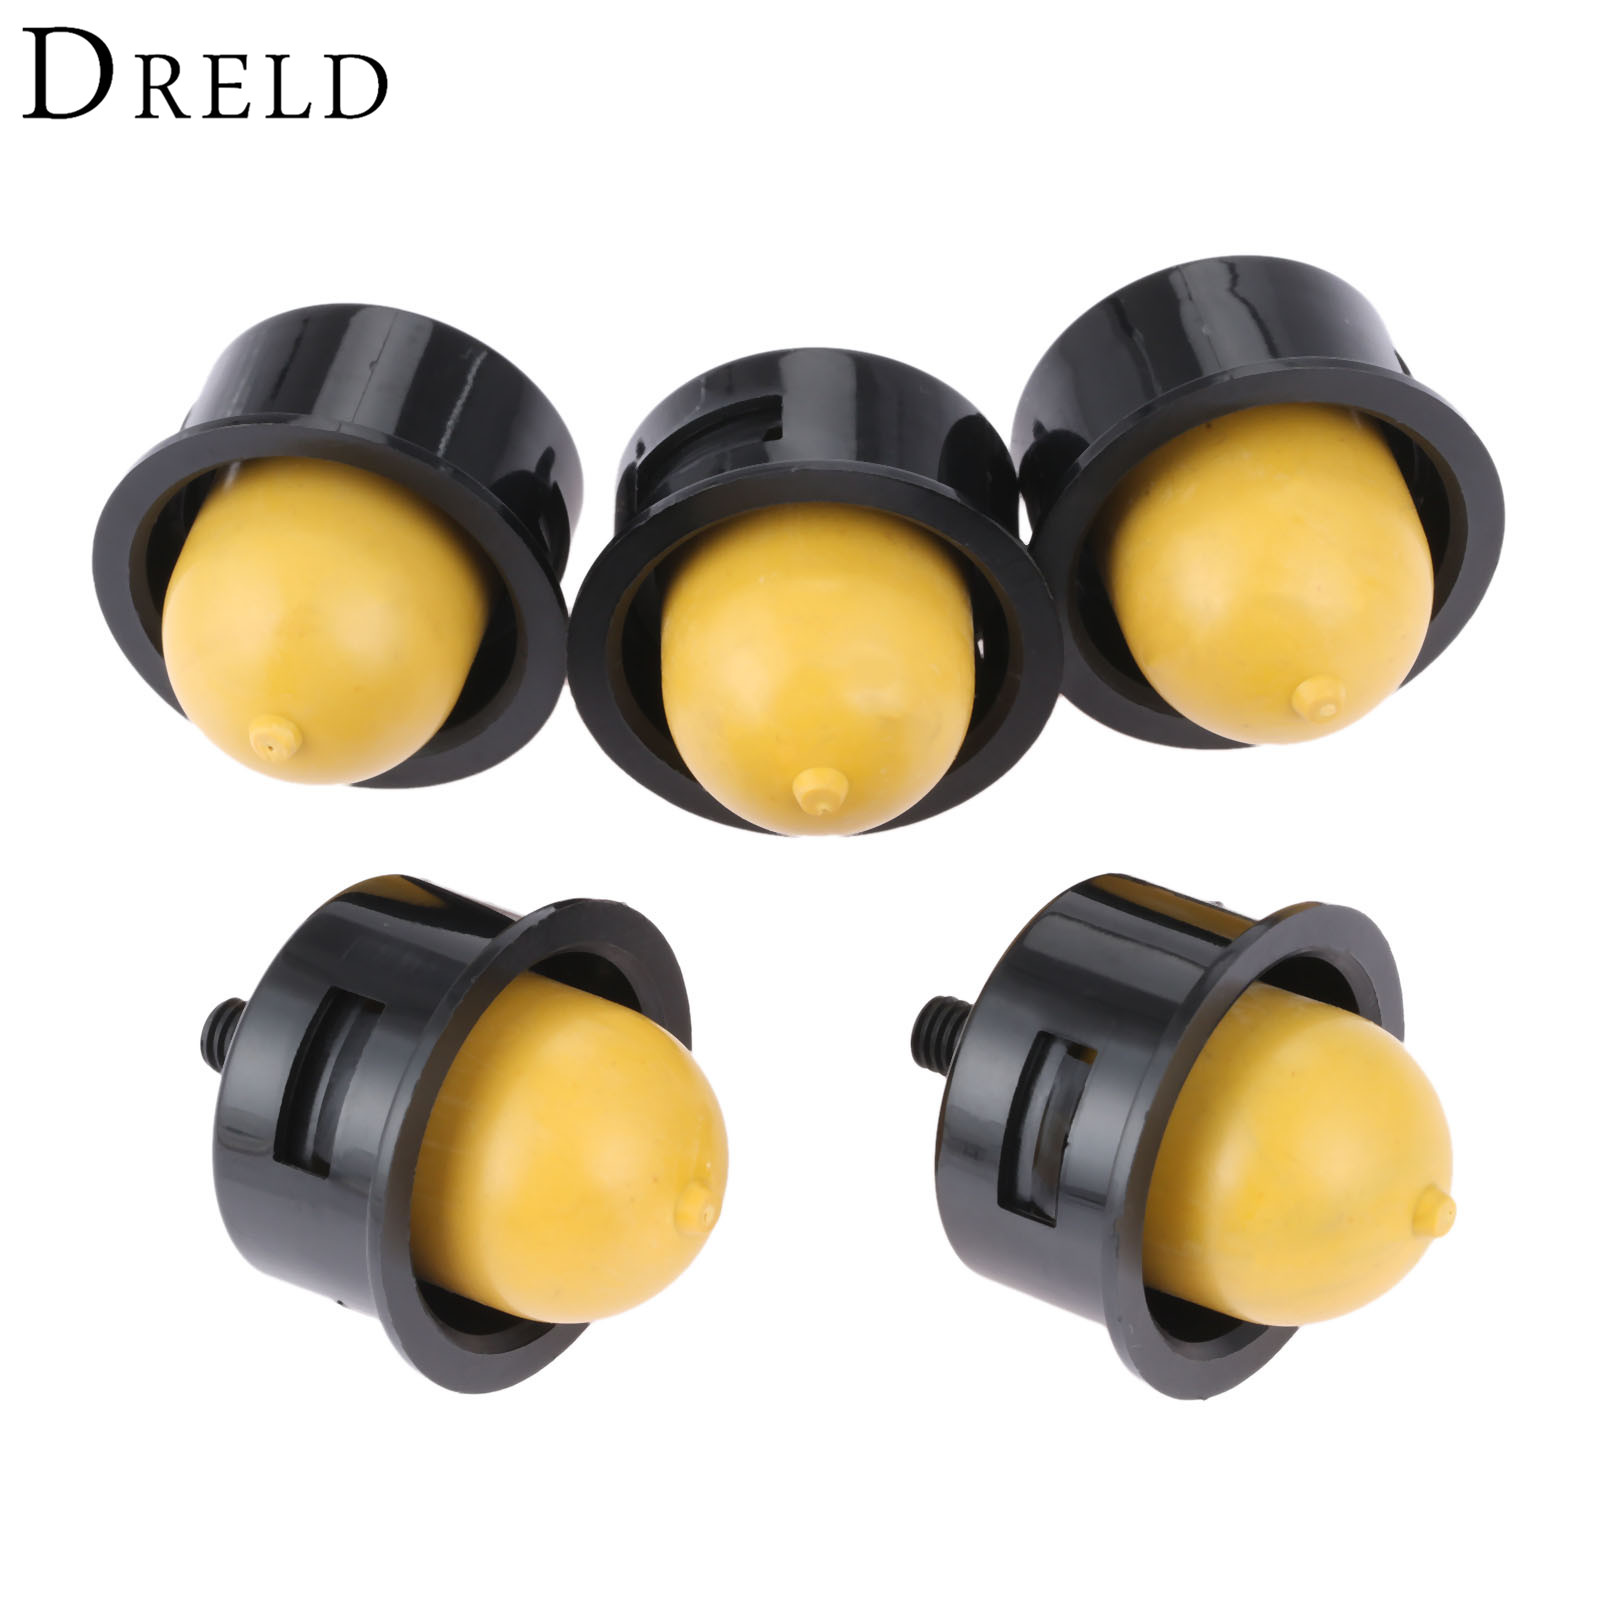 DRELD 5Pcs Carburetor Lawn Mower Primer Bulb with Steel Bolt For Lawnmower Blower Engine Replacment Chainsaws Garden Tools Parts